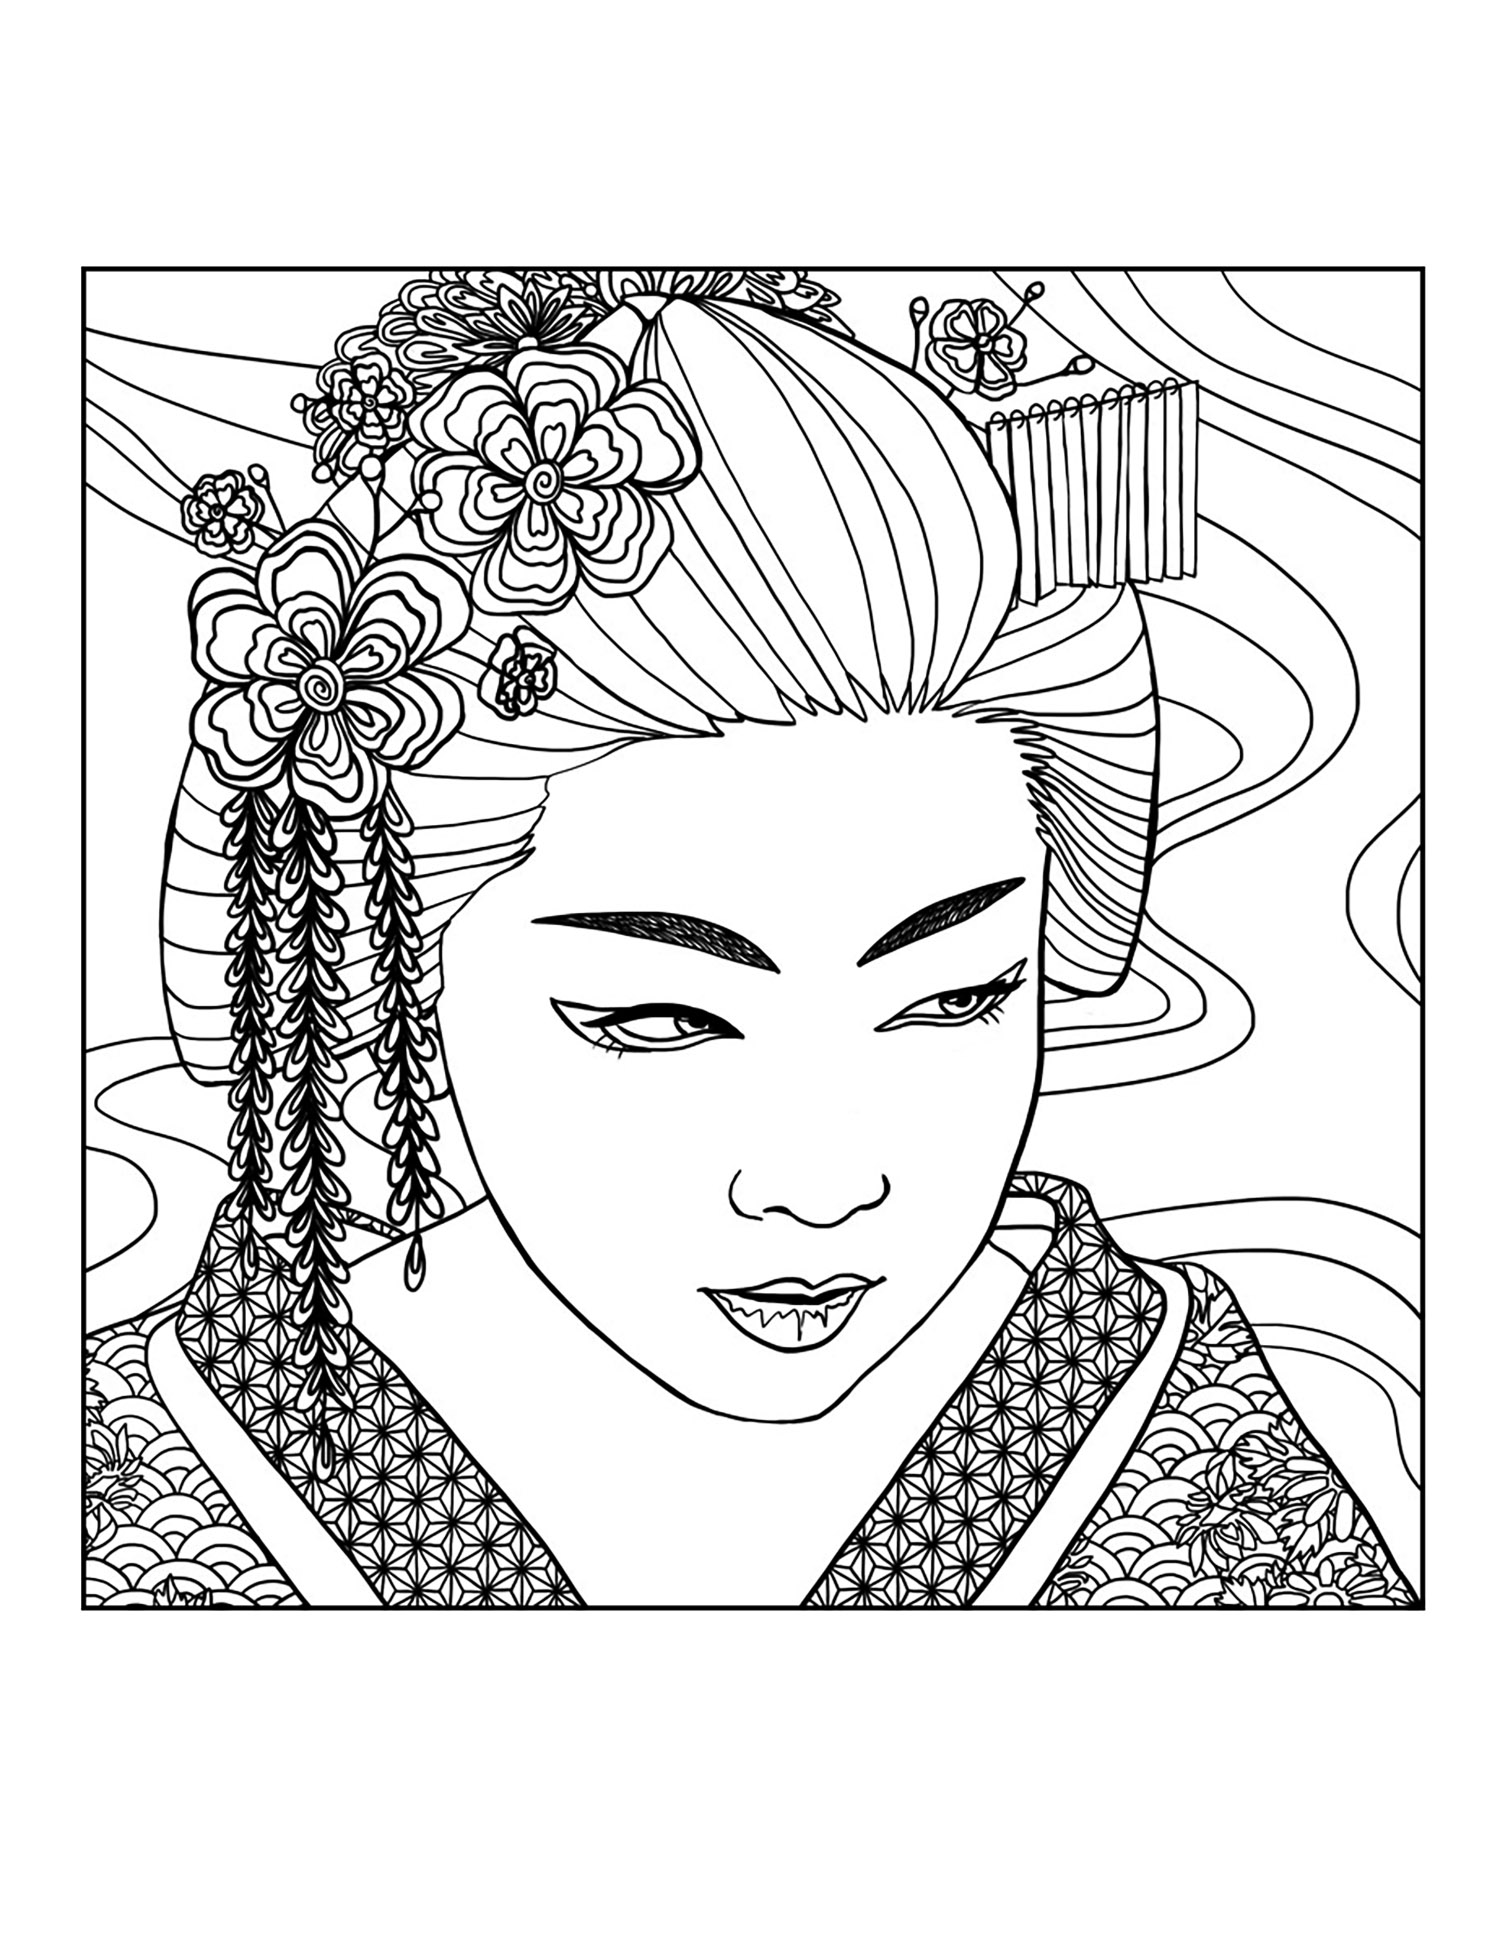 Download Geisha face - Japan Adult Coloring Pages